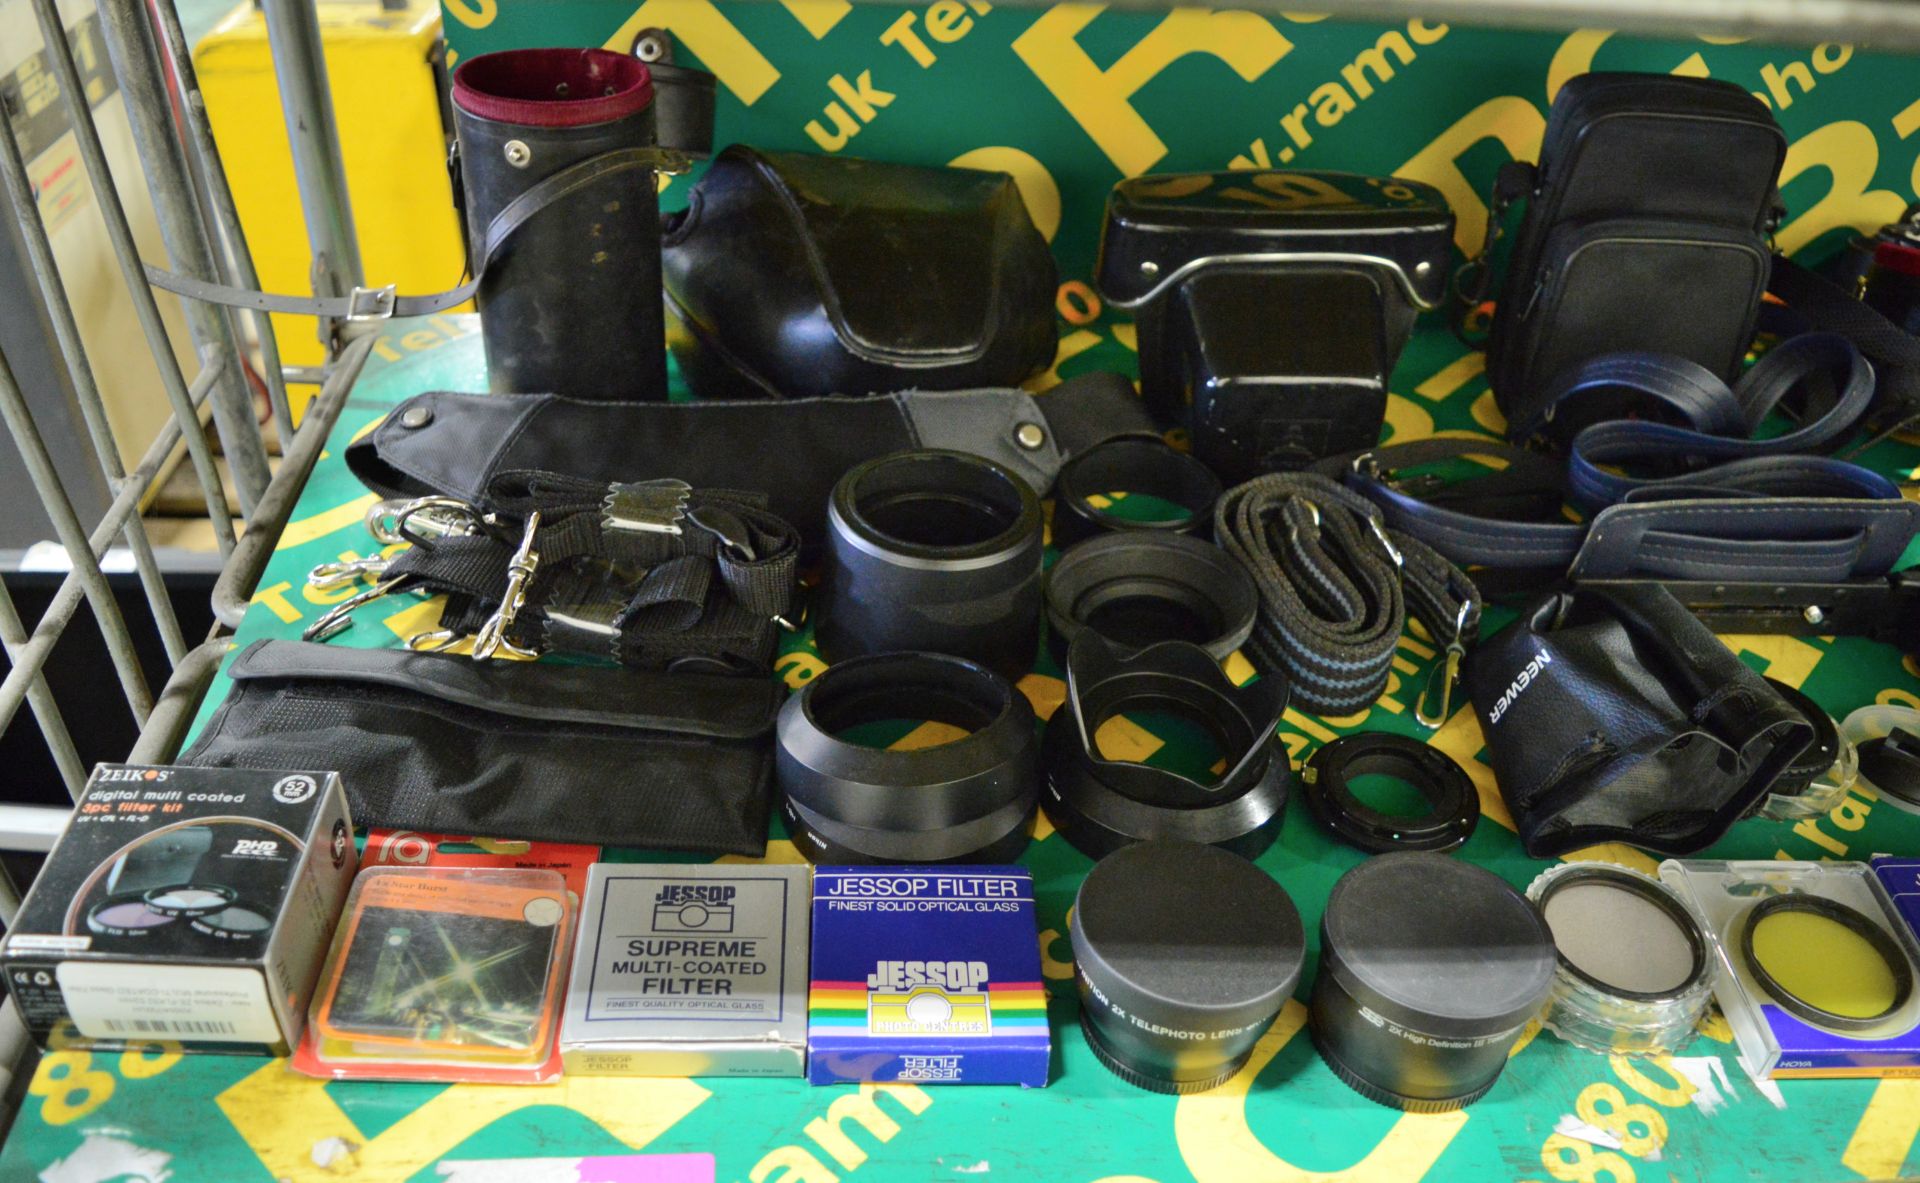 Camera Accessories inc Lenses, Cases, Battery Trays, Filters, Straps. - Image 2 of 3